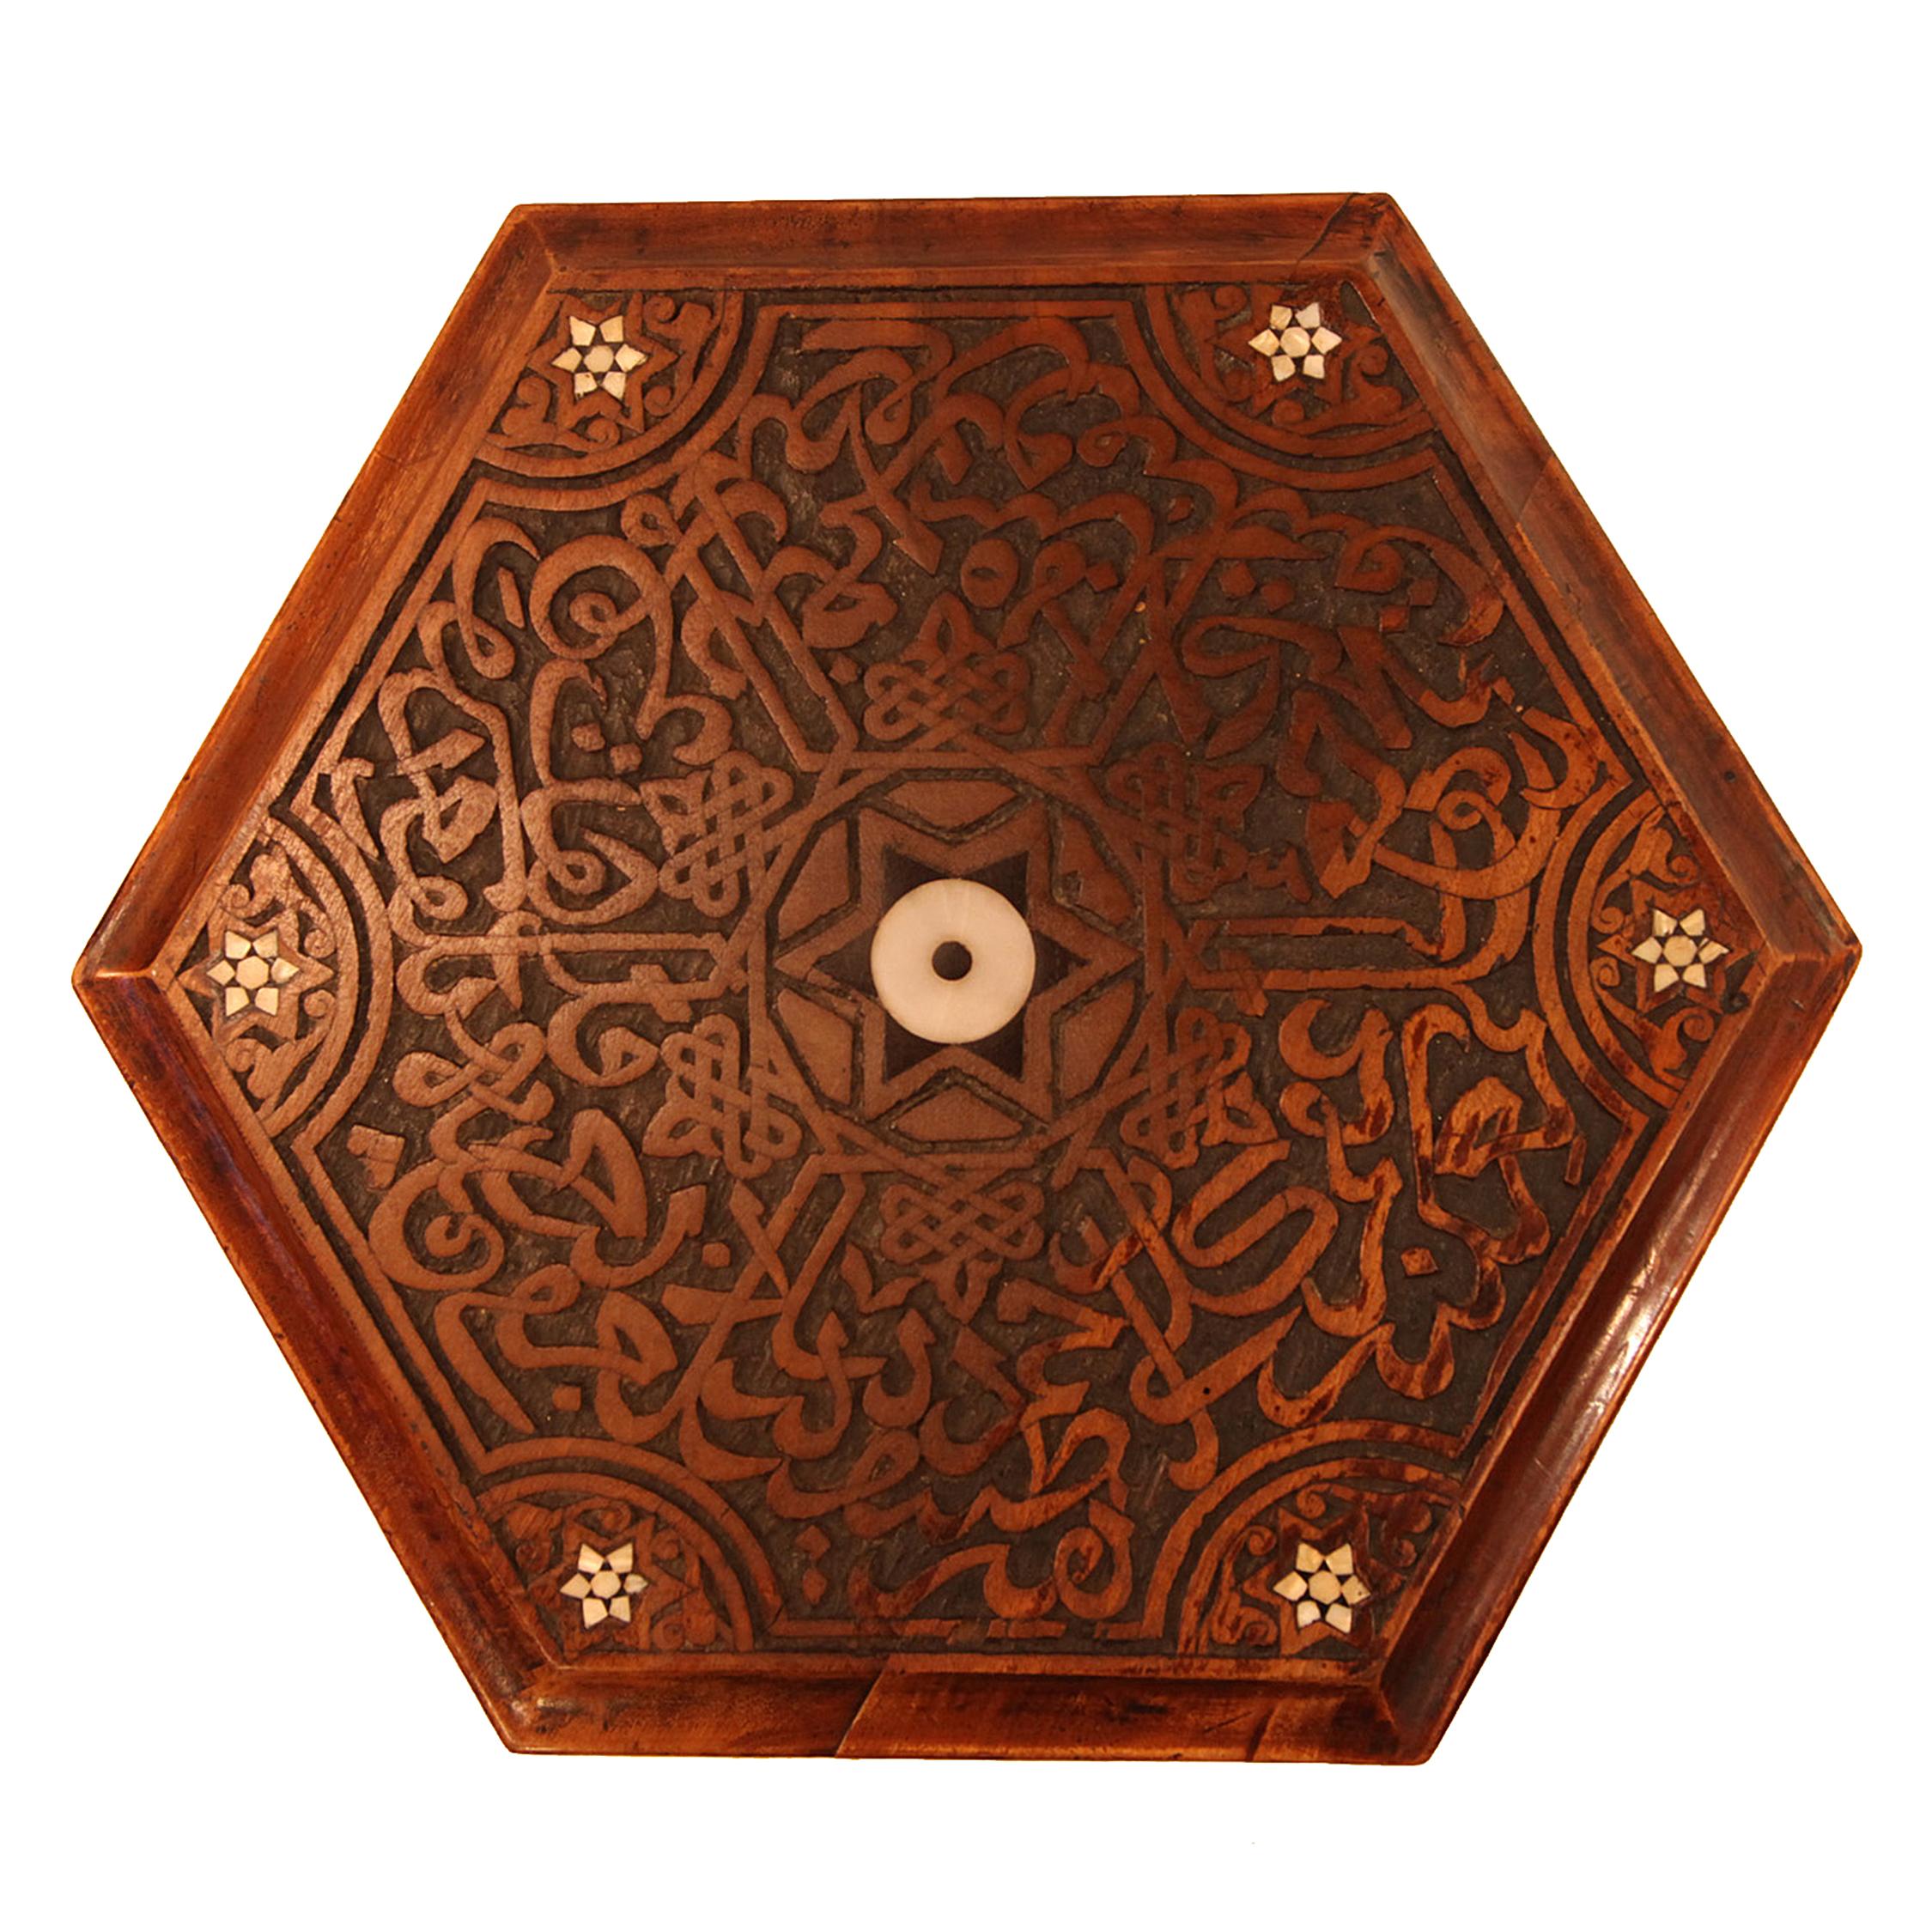 The tabletop with carved cutout shapes and mother of pearl inlay above an intricately carved base also with mother of pearl inlay, on ball feet.